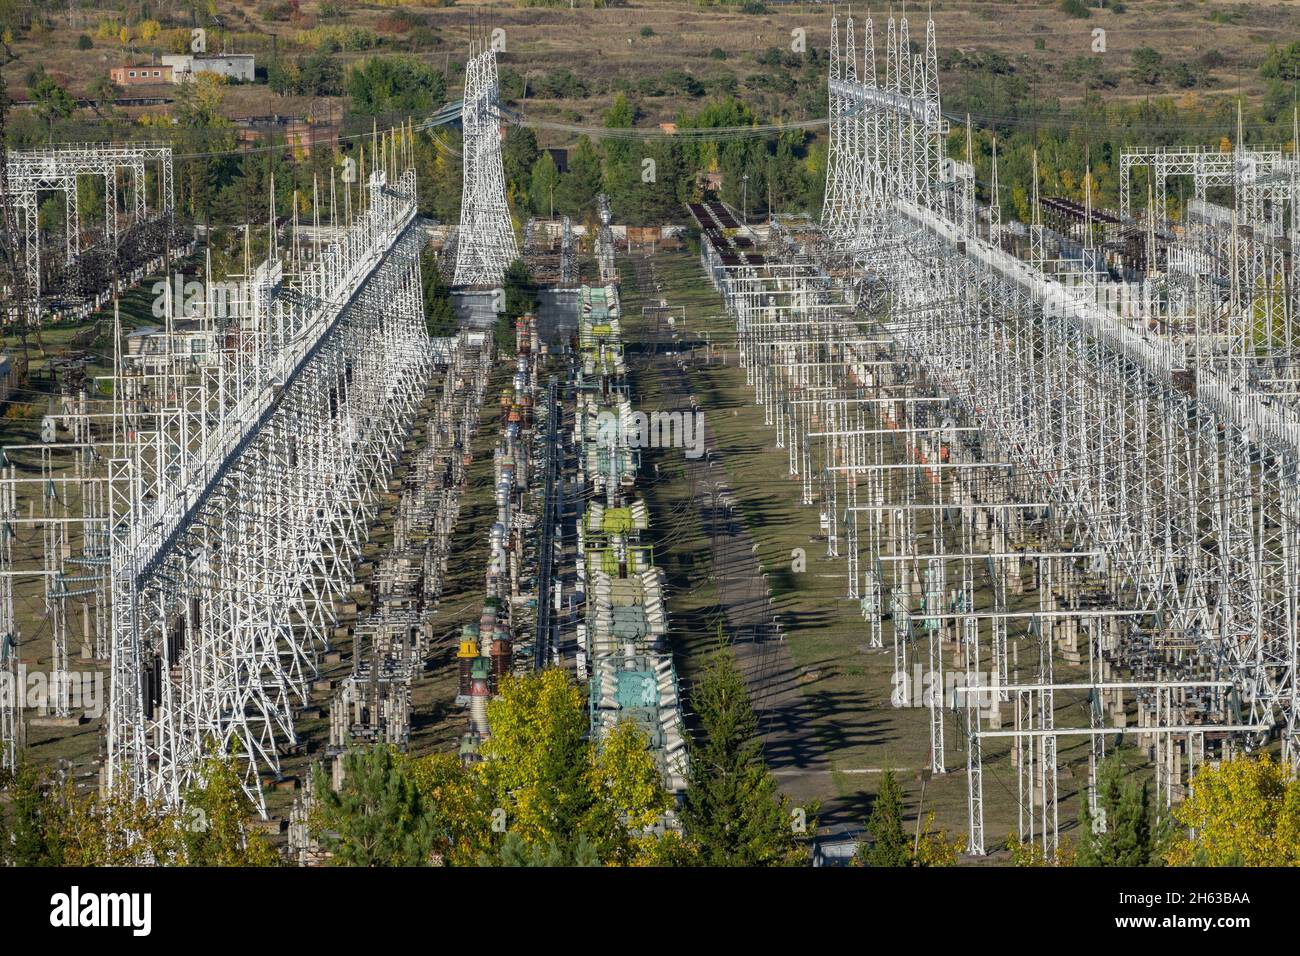 russia,siberia,bratsk,hydroelectric power station,electricity pylons and generators in the substation Stock Photo